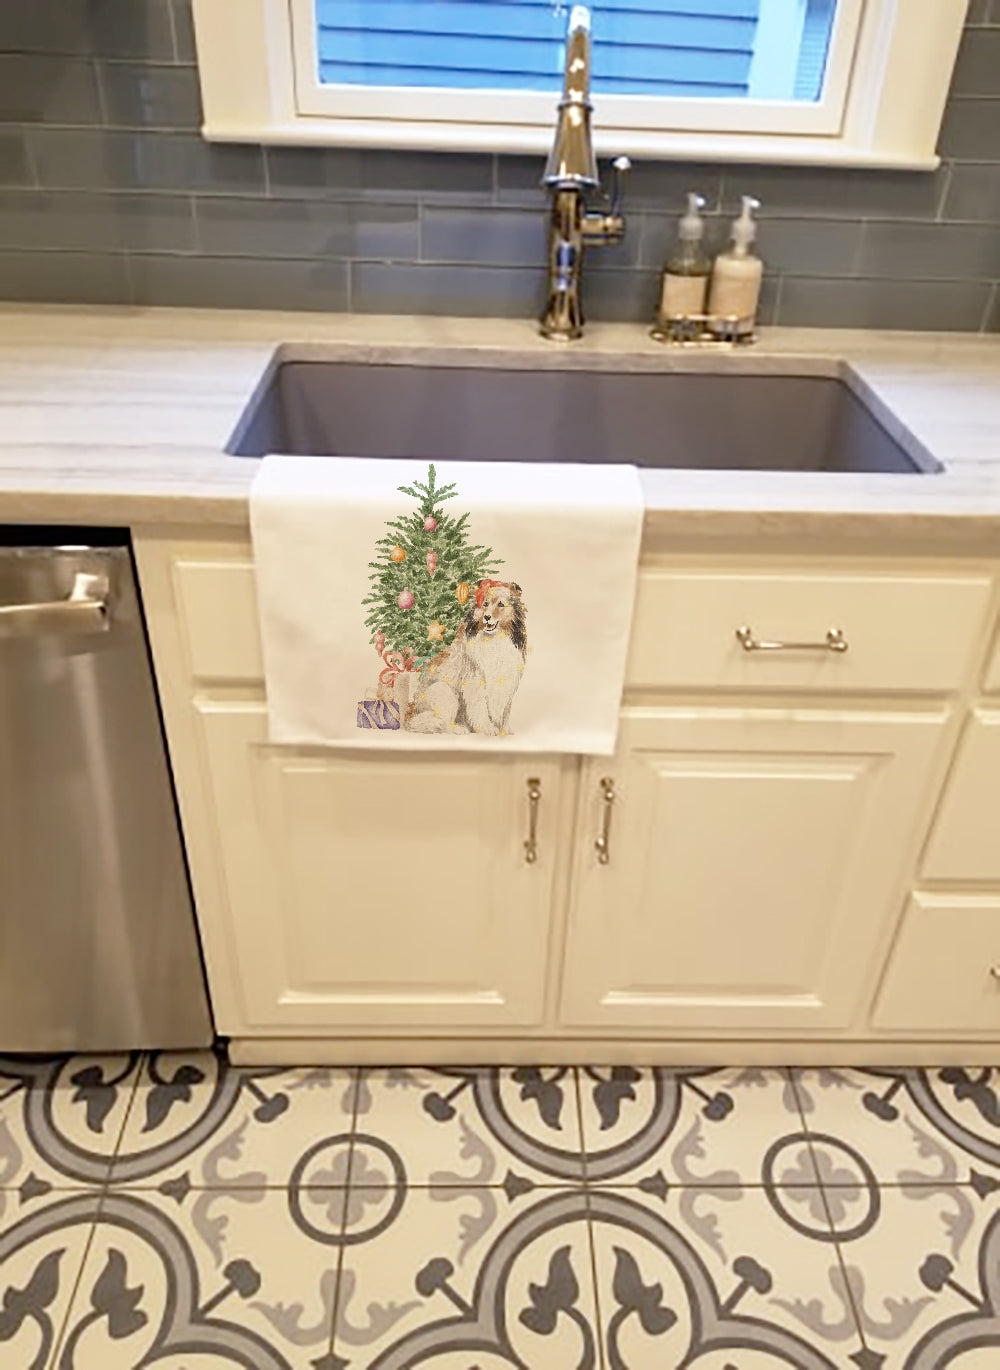 Buy this Sheltie Christmas Presents and Tree White Kitchen Towel Set of 2